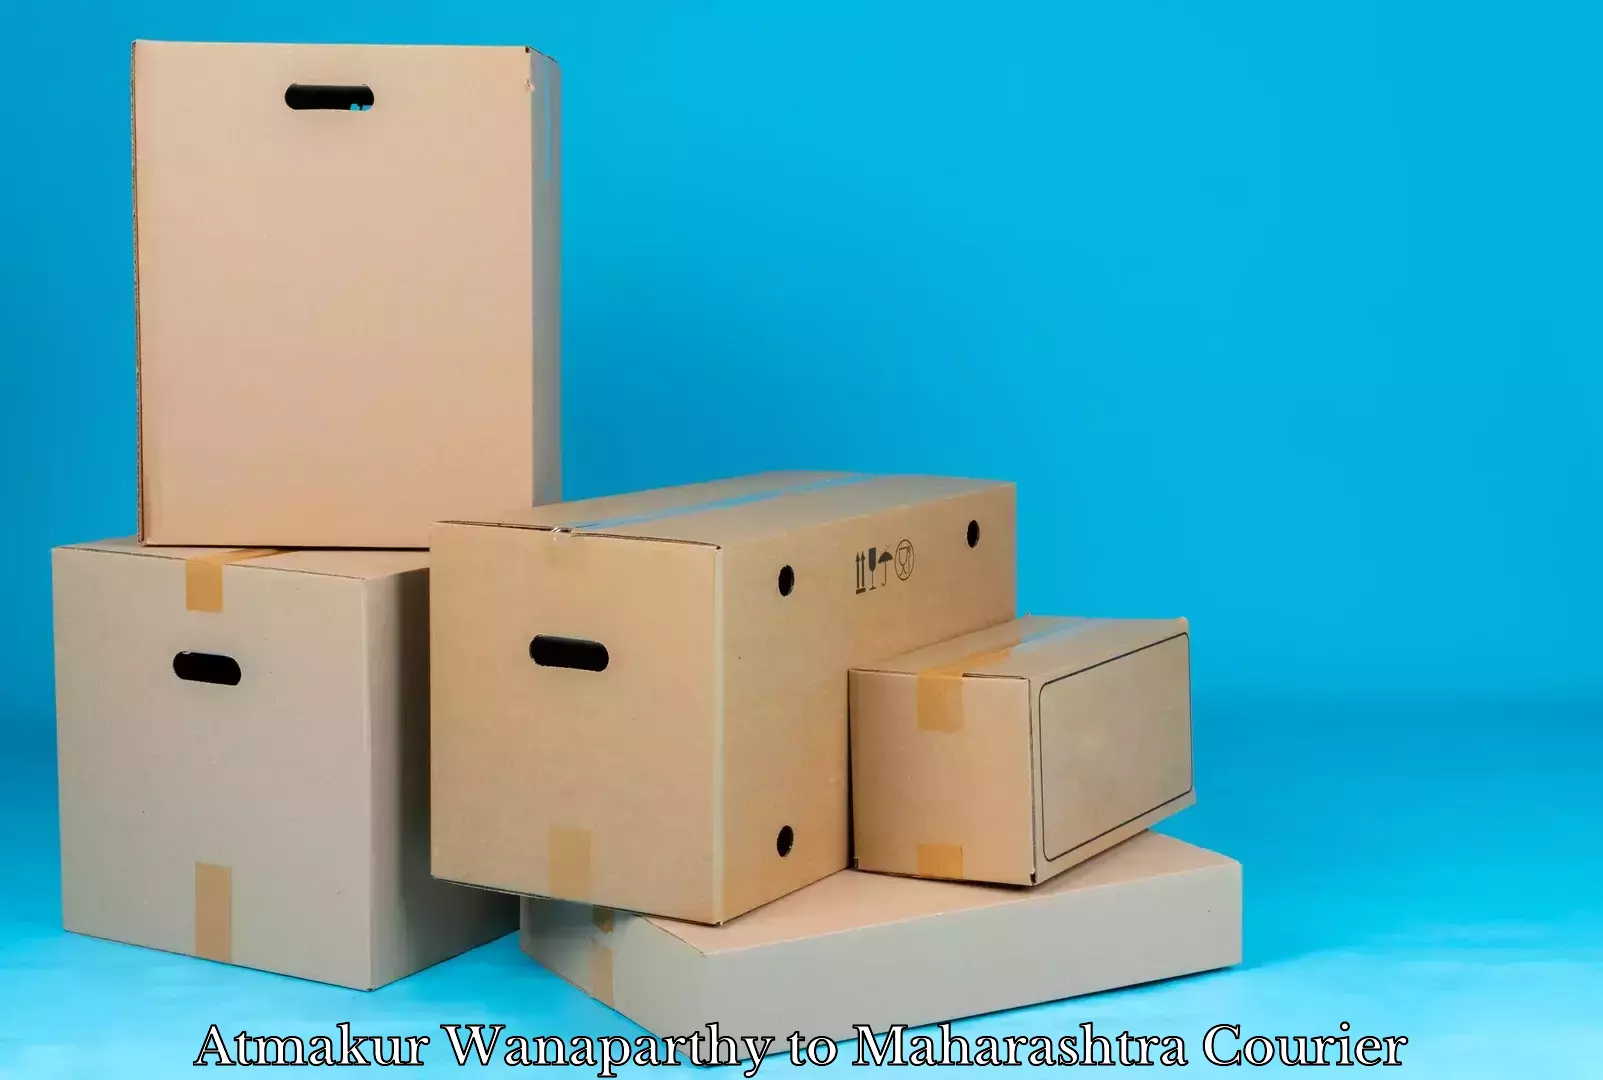 Professional packing services Atmakur Wanaparthy to Chiplun